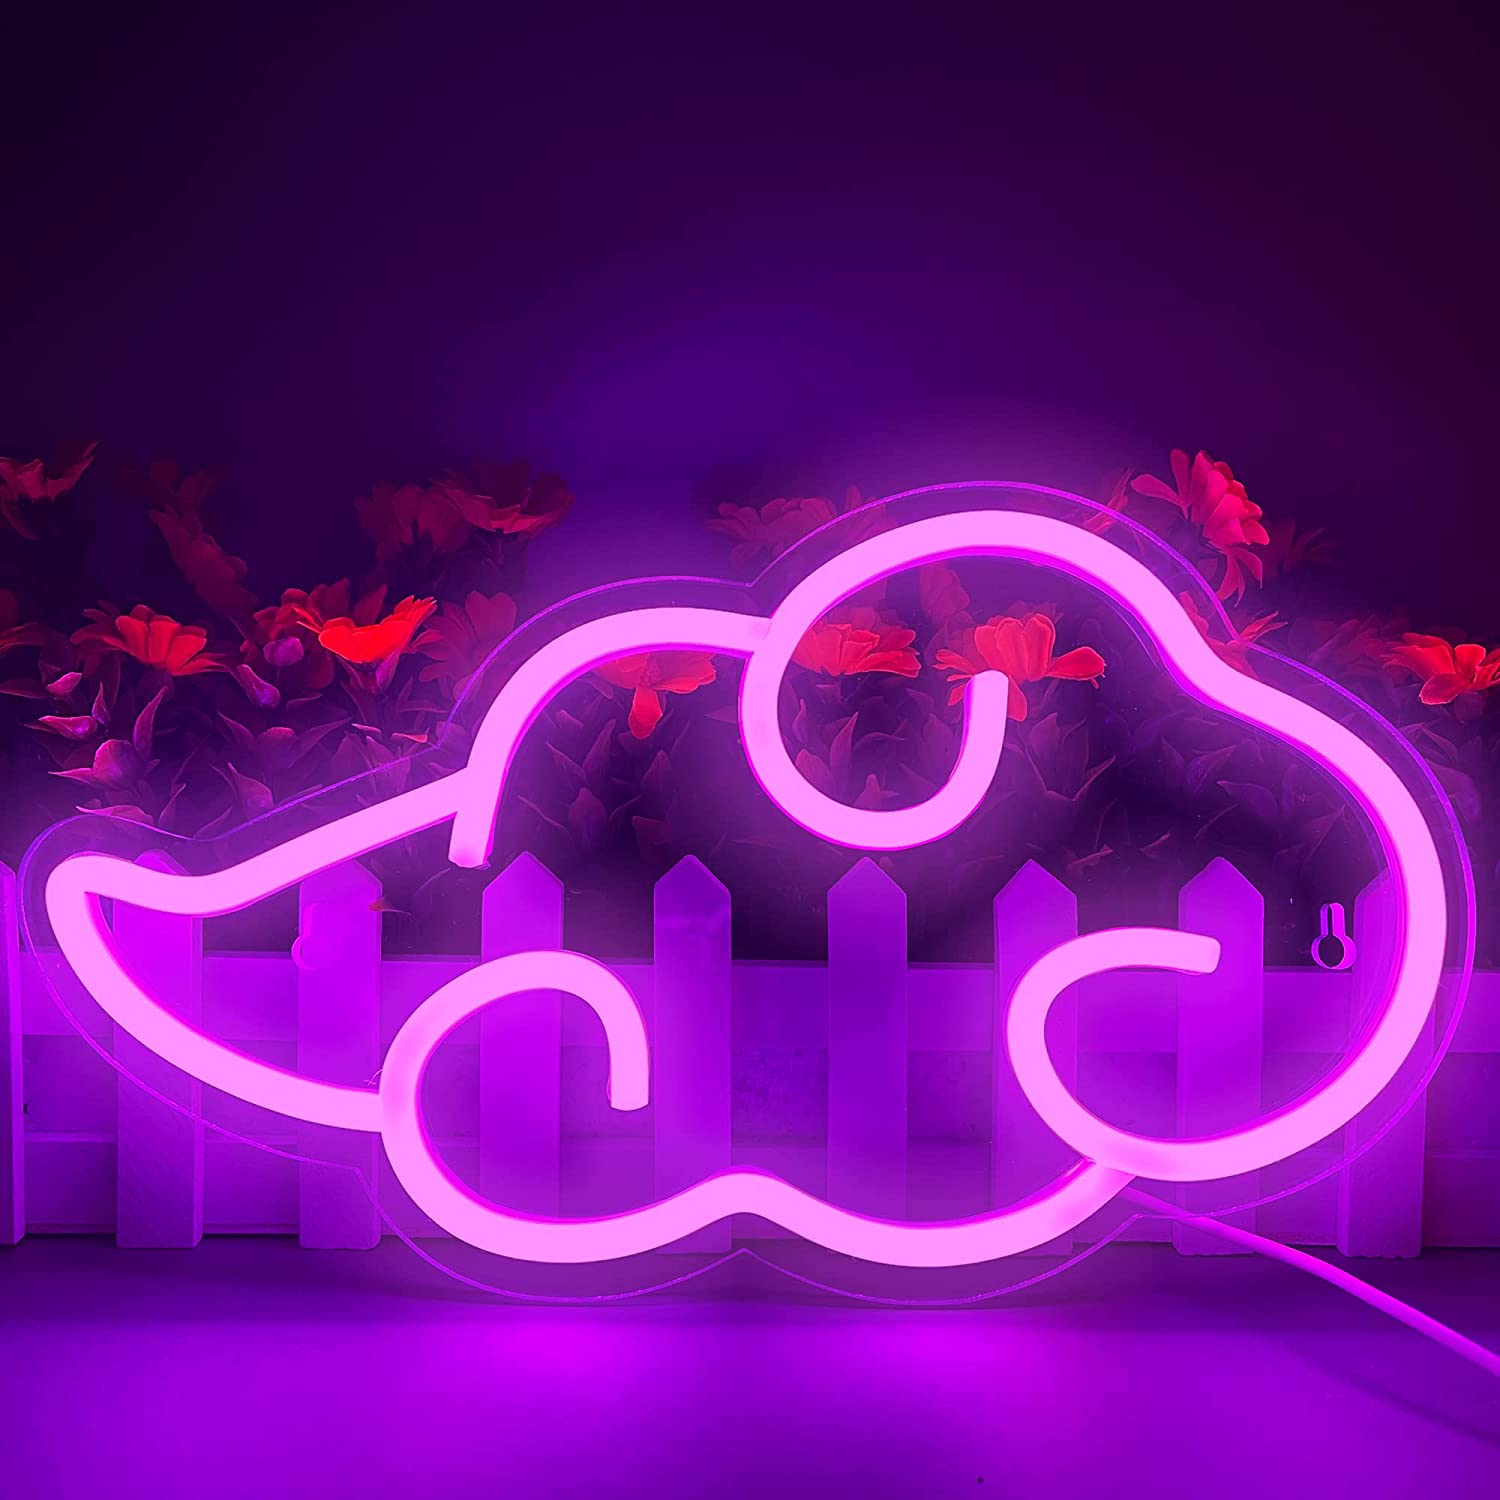 Blue Clouds Neon Sign Led Signs for home Bedroom Kids Room Happy vibe  Party Wall Decor Anime Led Art 8 X 14 Inches